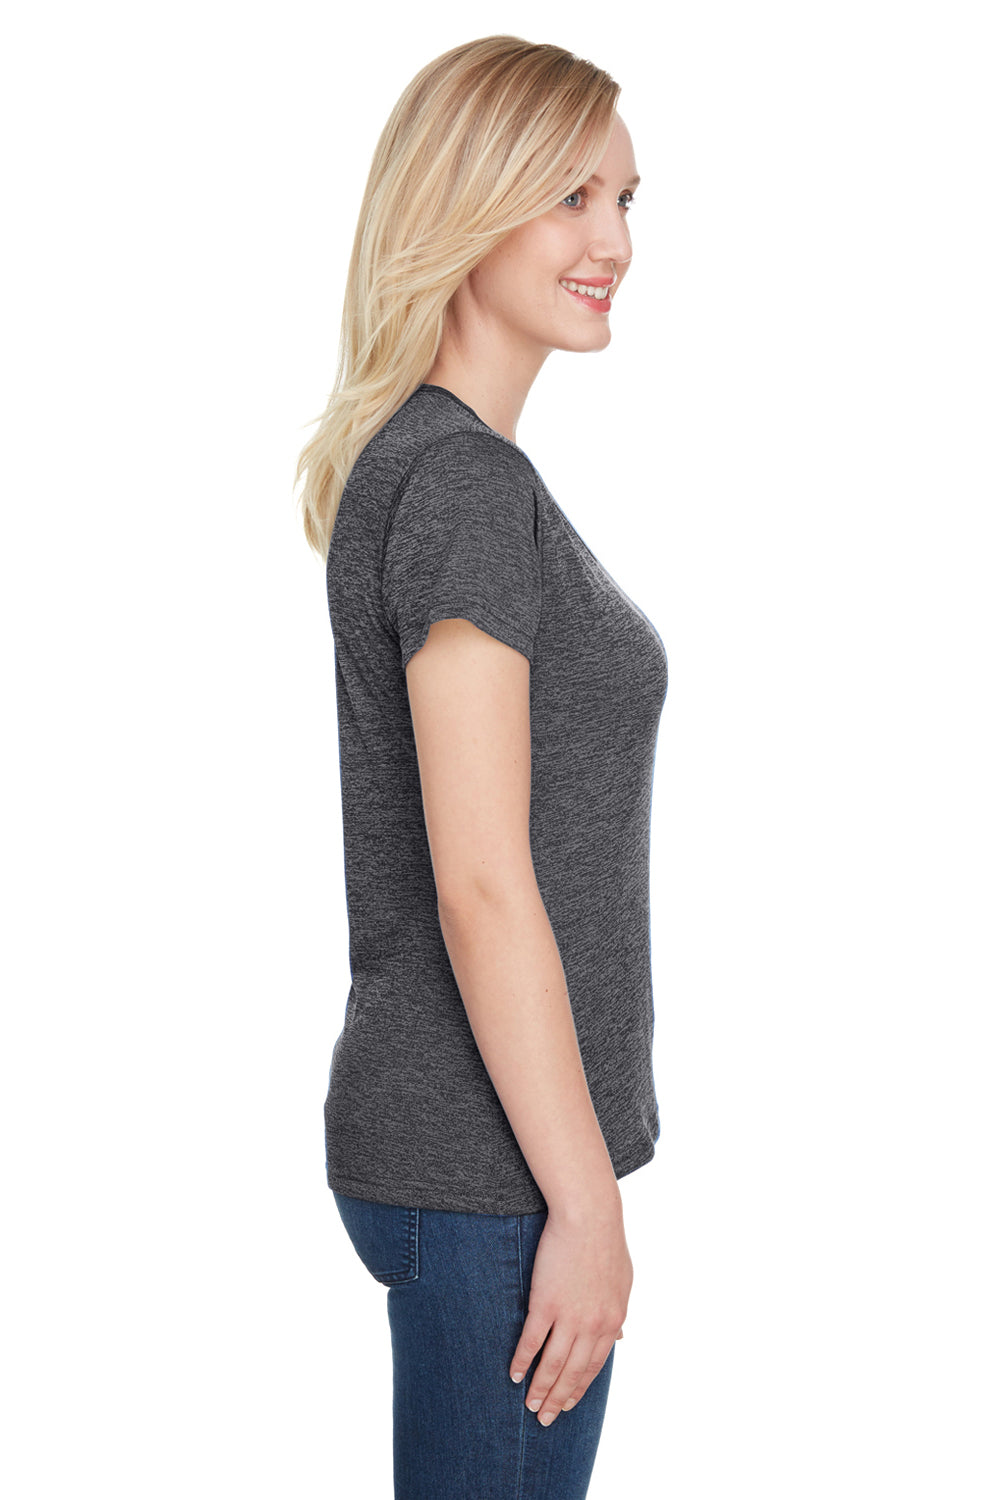 A4 NW3010 Womens Tonal Space Dye Short Sleeve Scoop Neck T-Shirt Charcoal Grey Side